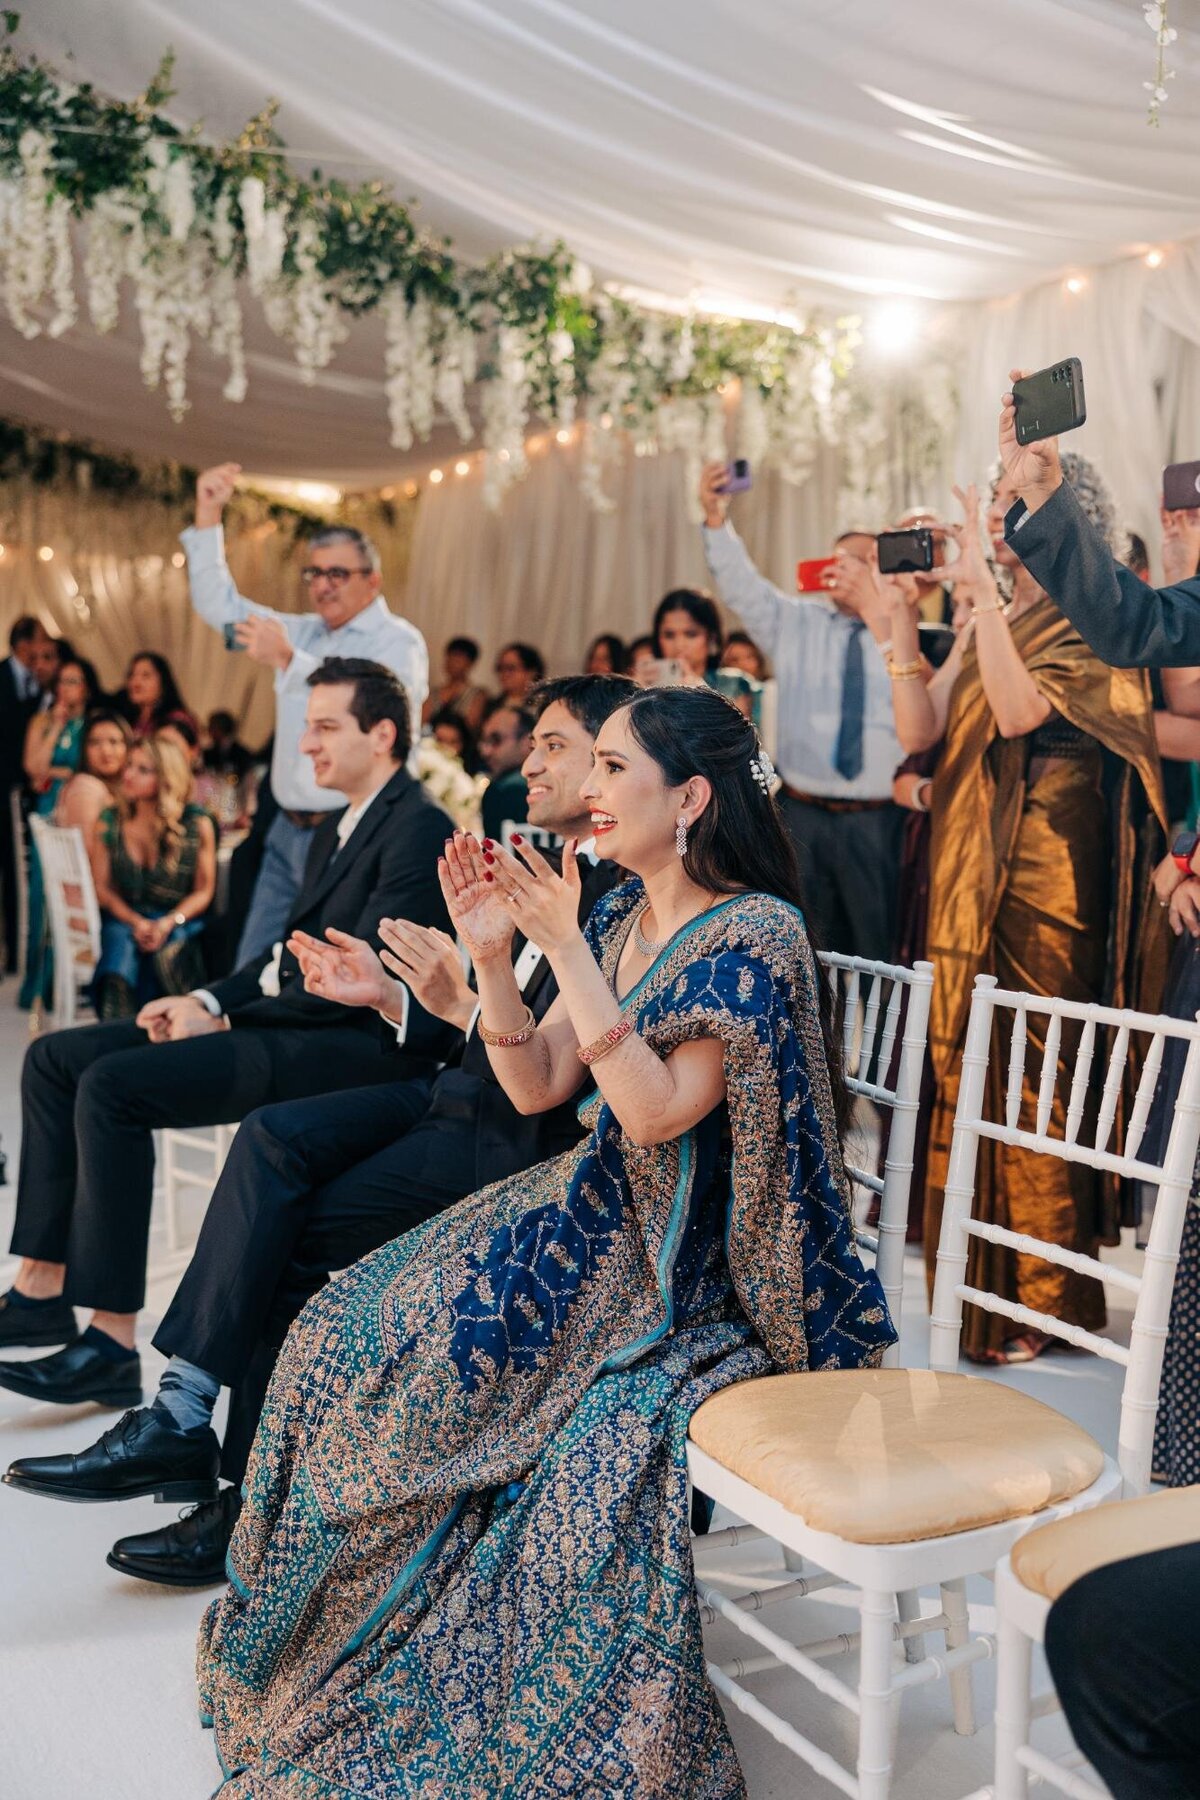 Guests in formal attire clapping and capturing a moment at a wedding reception inside a tent decorated with white drapes and floral arrangements.